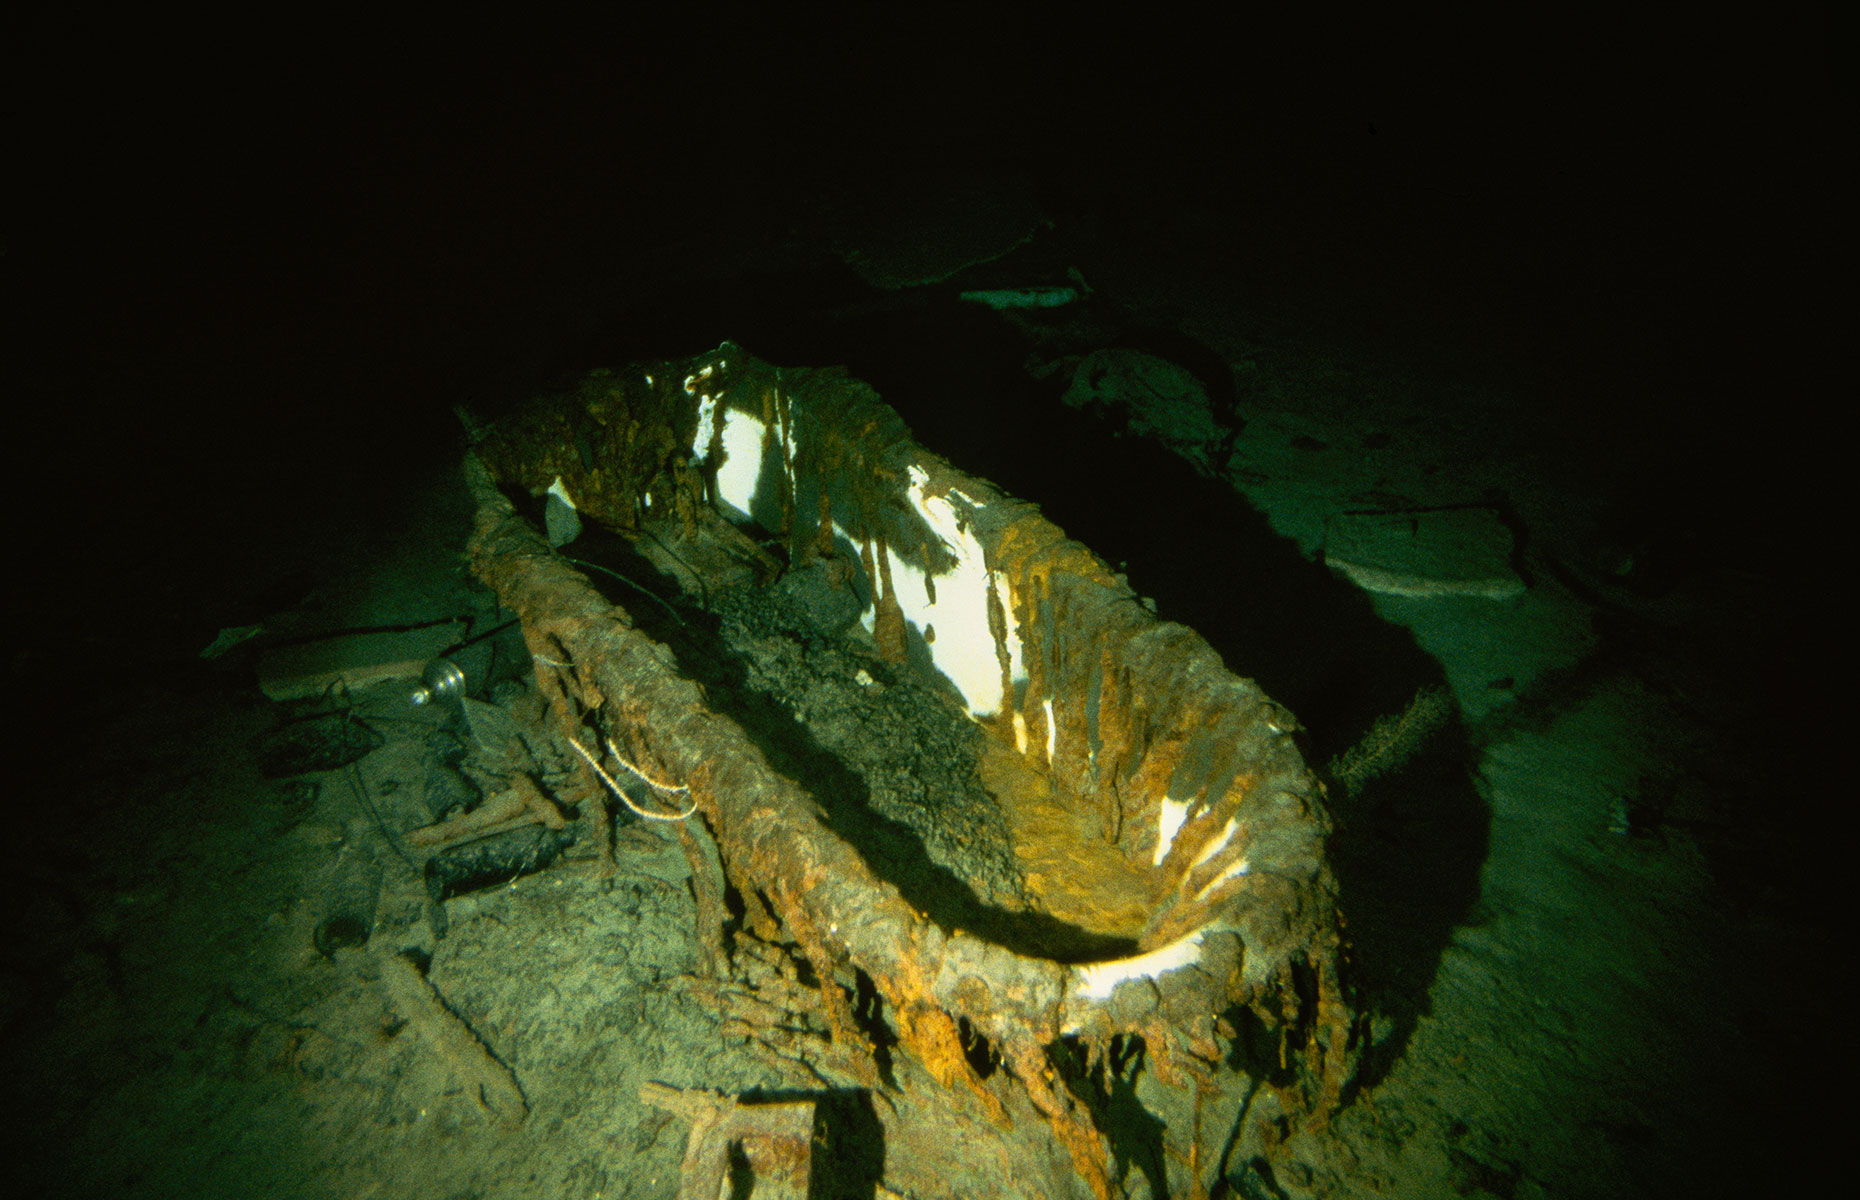 Bathtub in the debris trail of the RMS Titanic (Robert Ballard and Martin Bowen/Woods Hole Oceanographic Institution (WHOI))